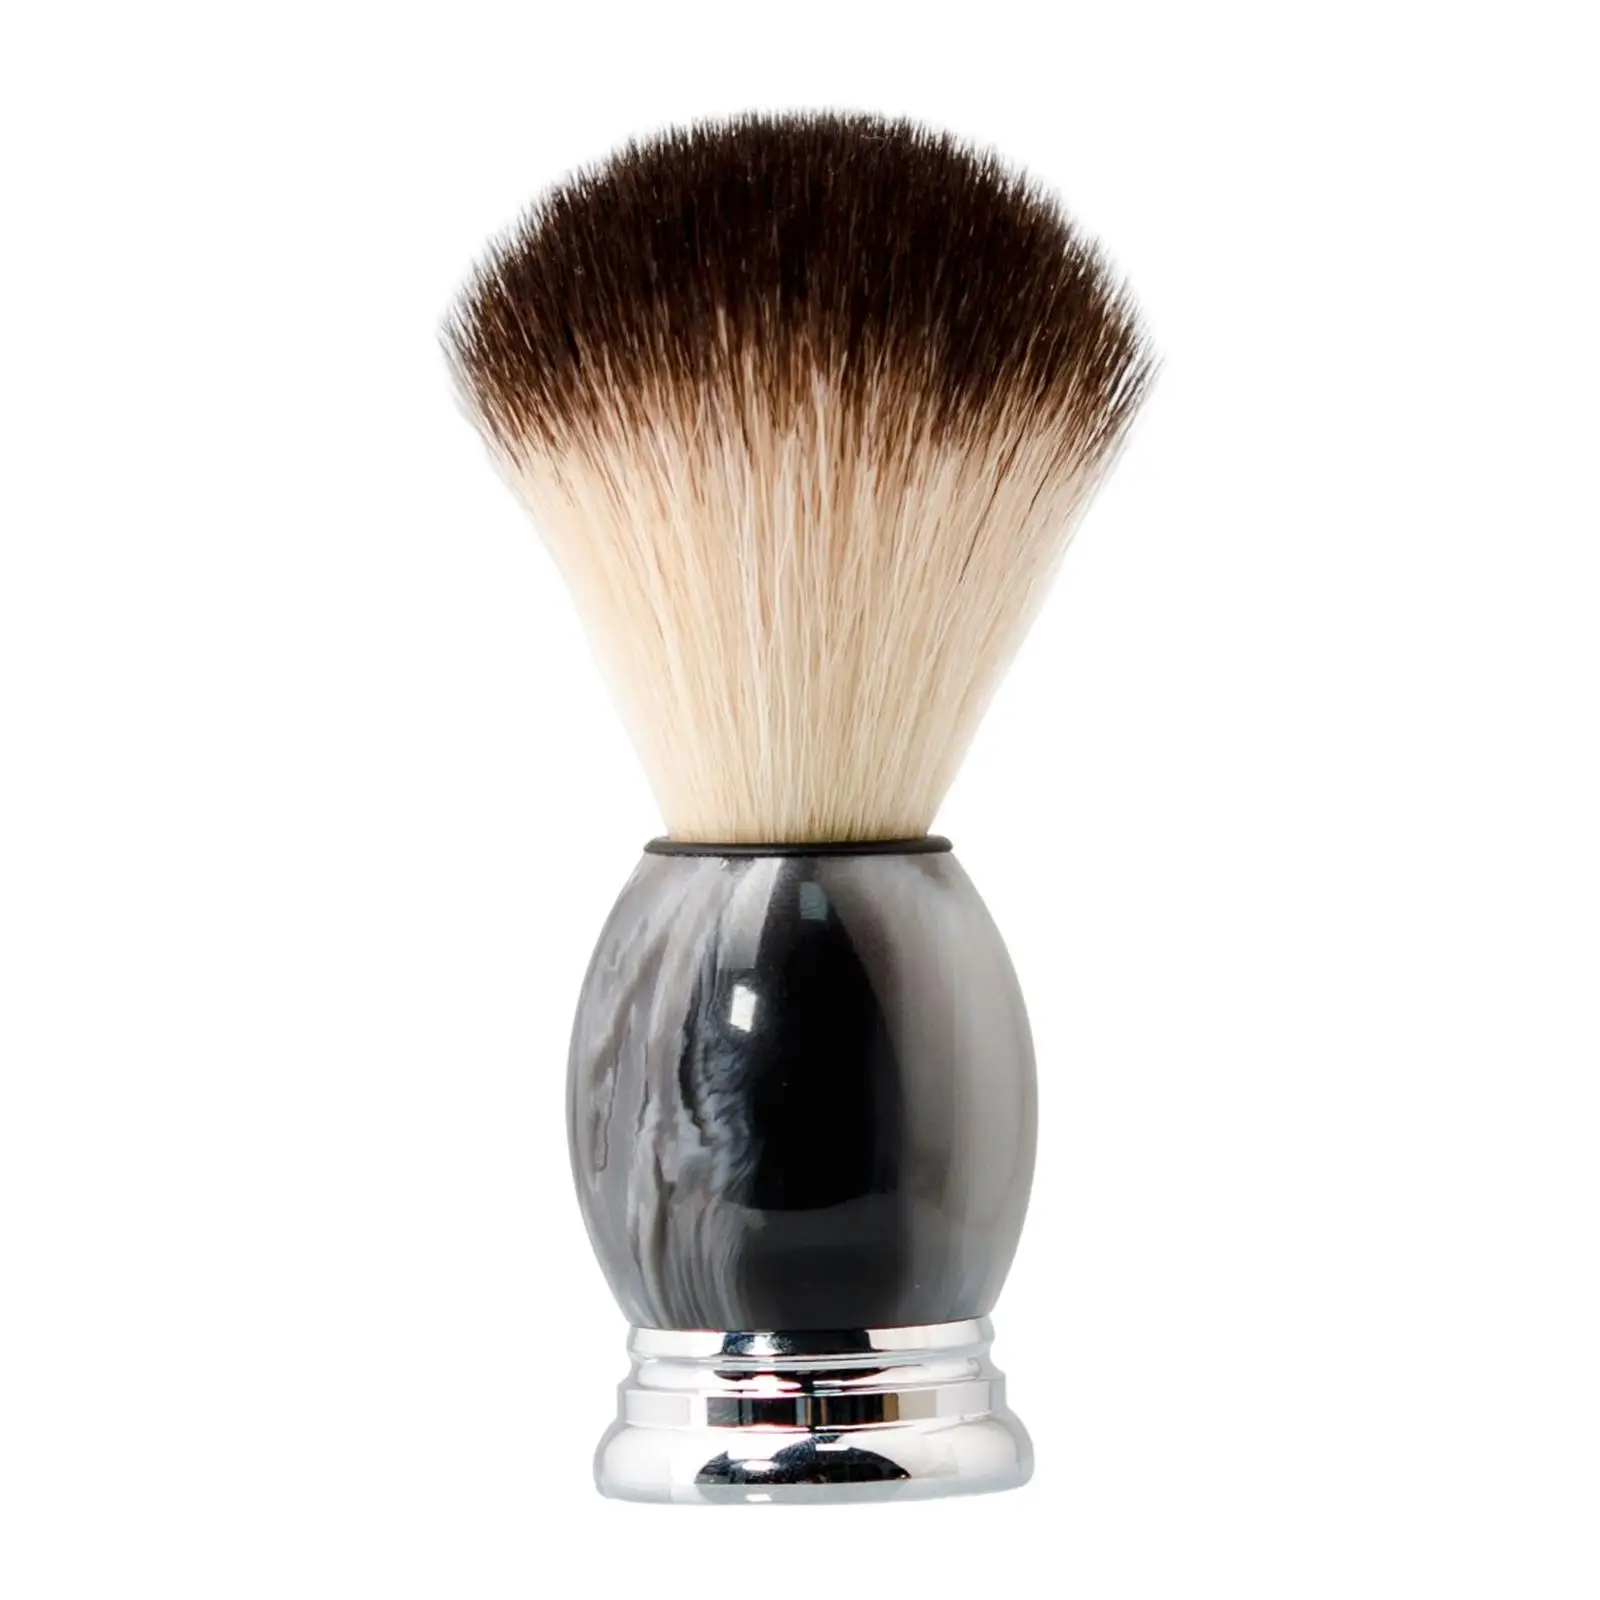 Shaving Brush Him Dad Boyfriend Husband Face Cleaning Male Care Grooming Product Handmade Shaving Brush Men`s Shaving Brush